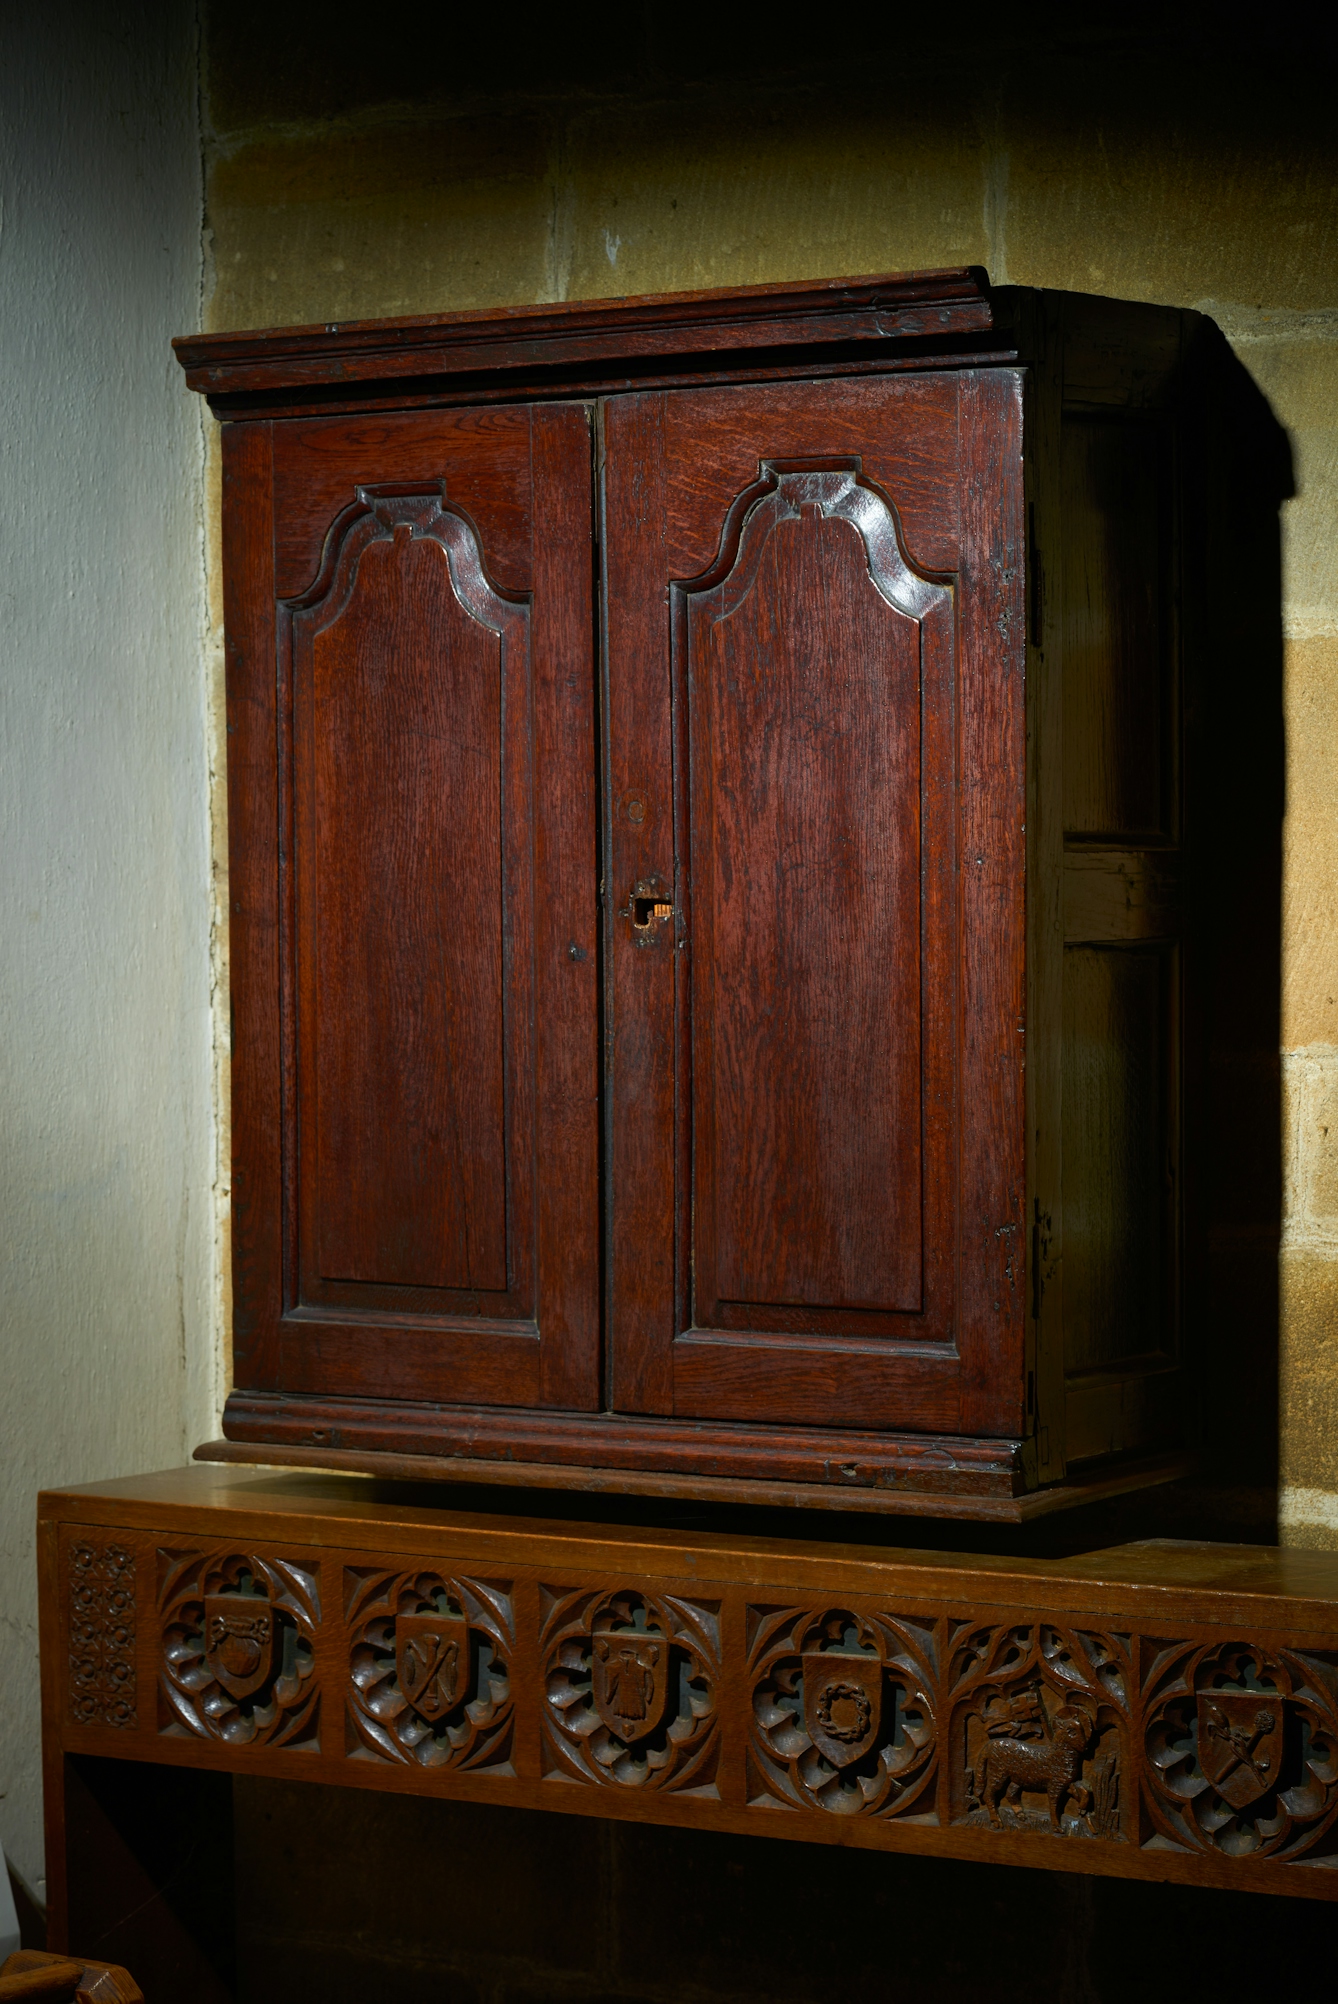 Photograph of a wooden cupboard with inlaid doors against the stone brick wall of a church.